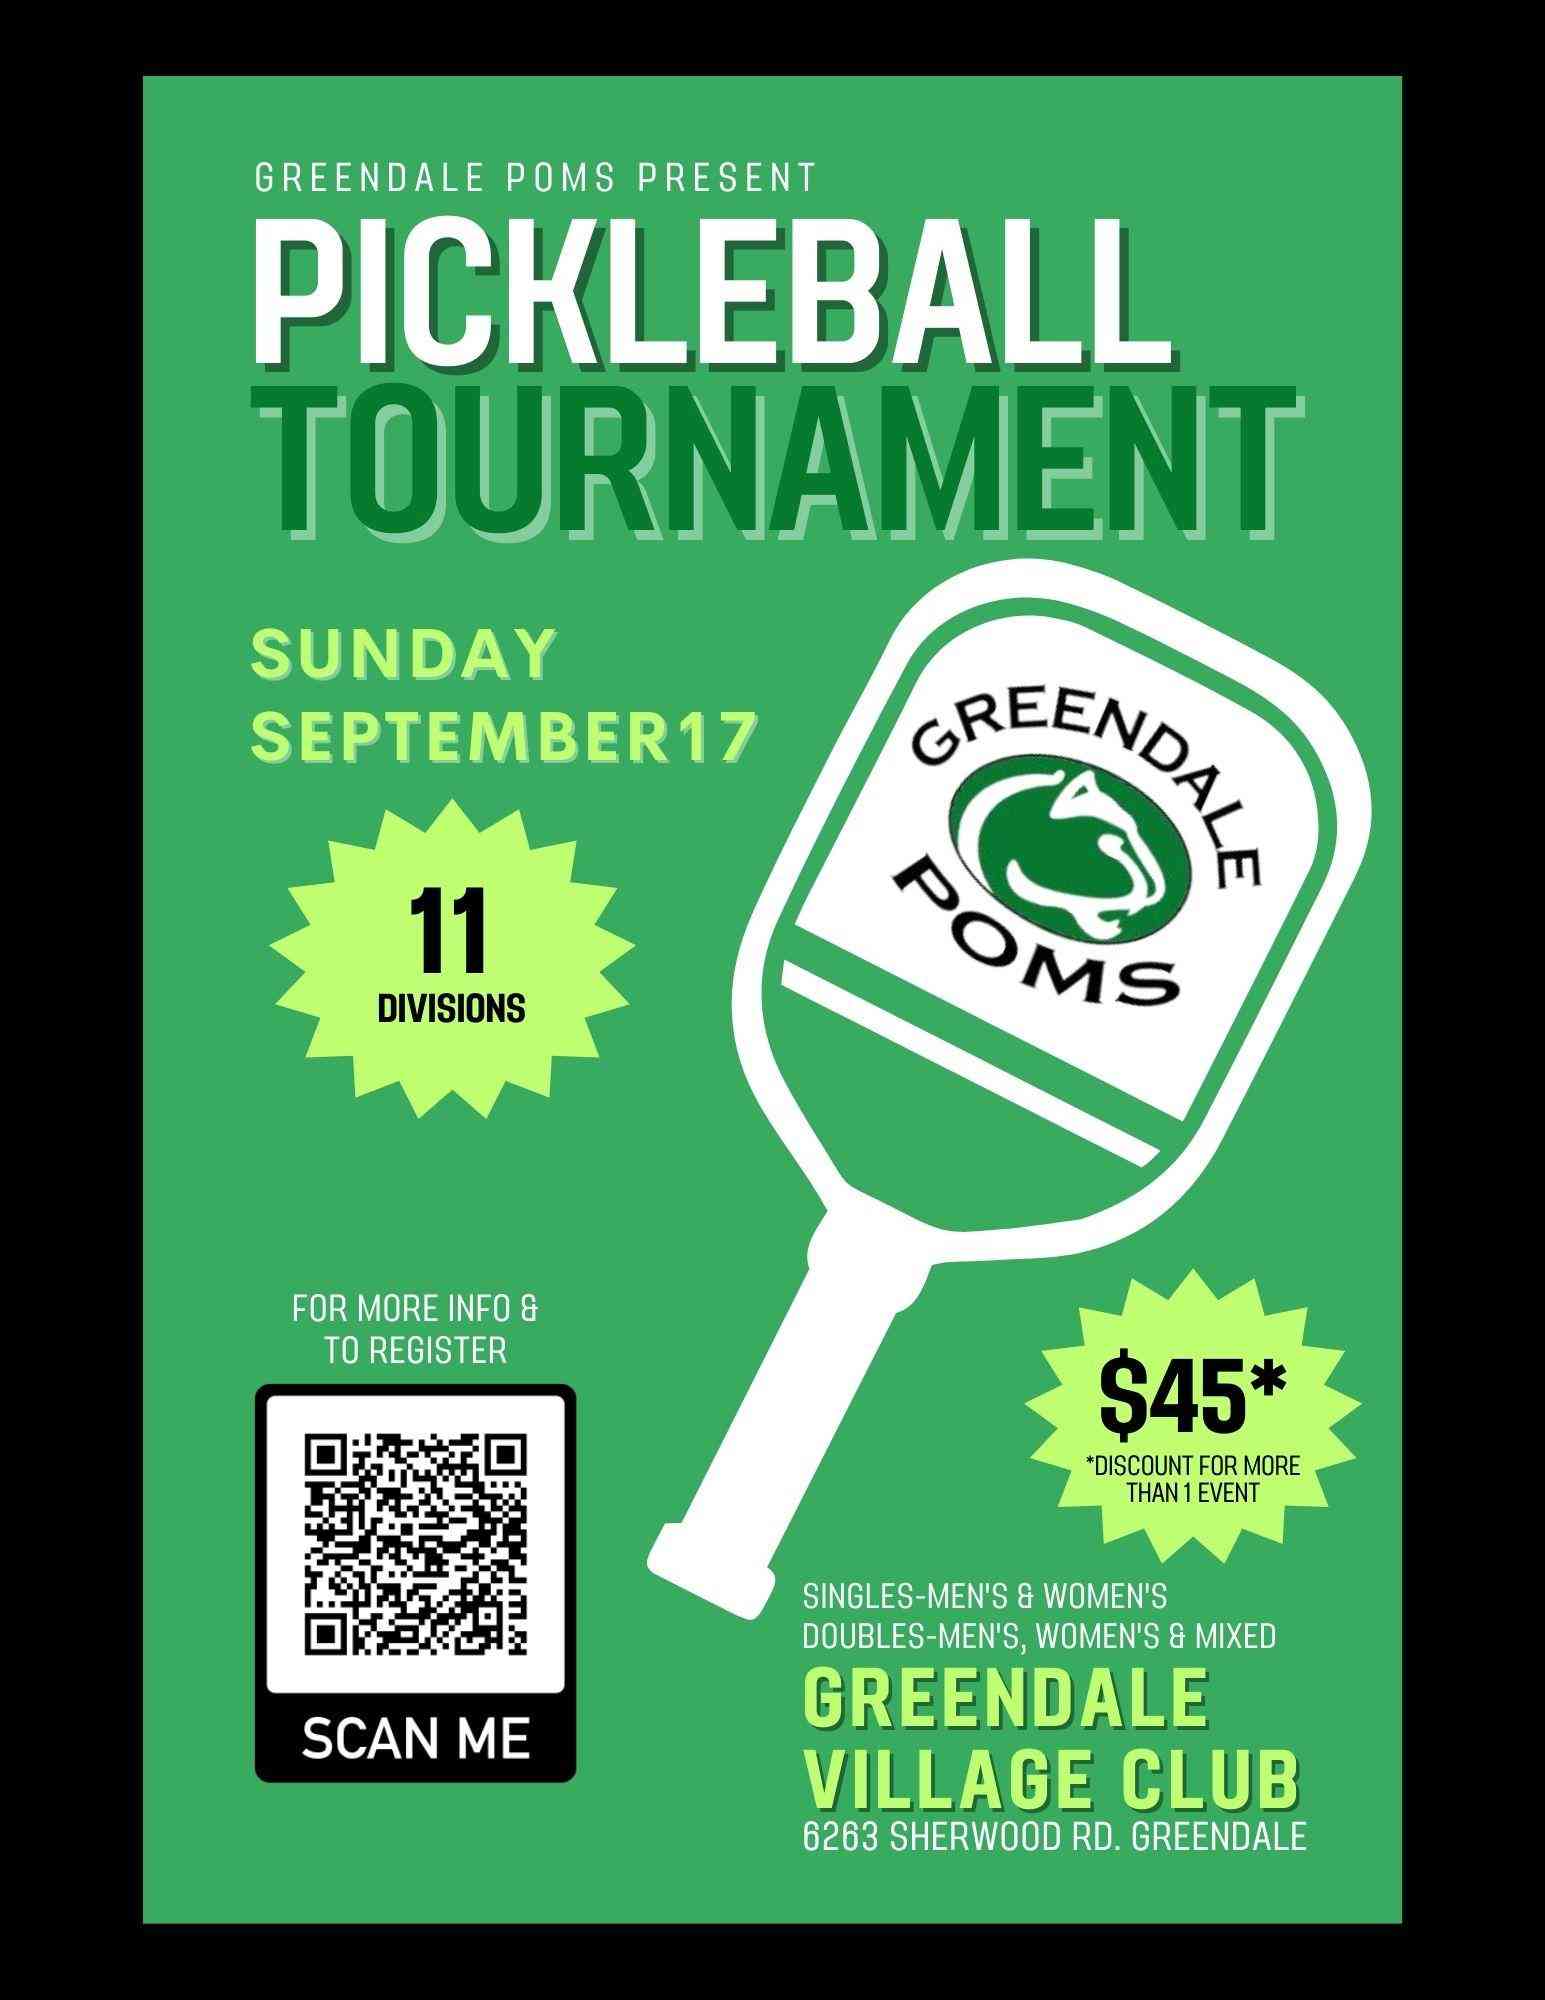 REGISTRATION IS NOW CLOSED: Pickleball Tournament - Presented by the Greendale Poms Image